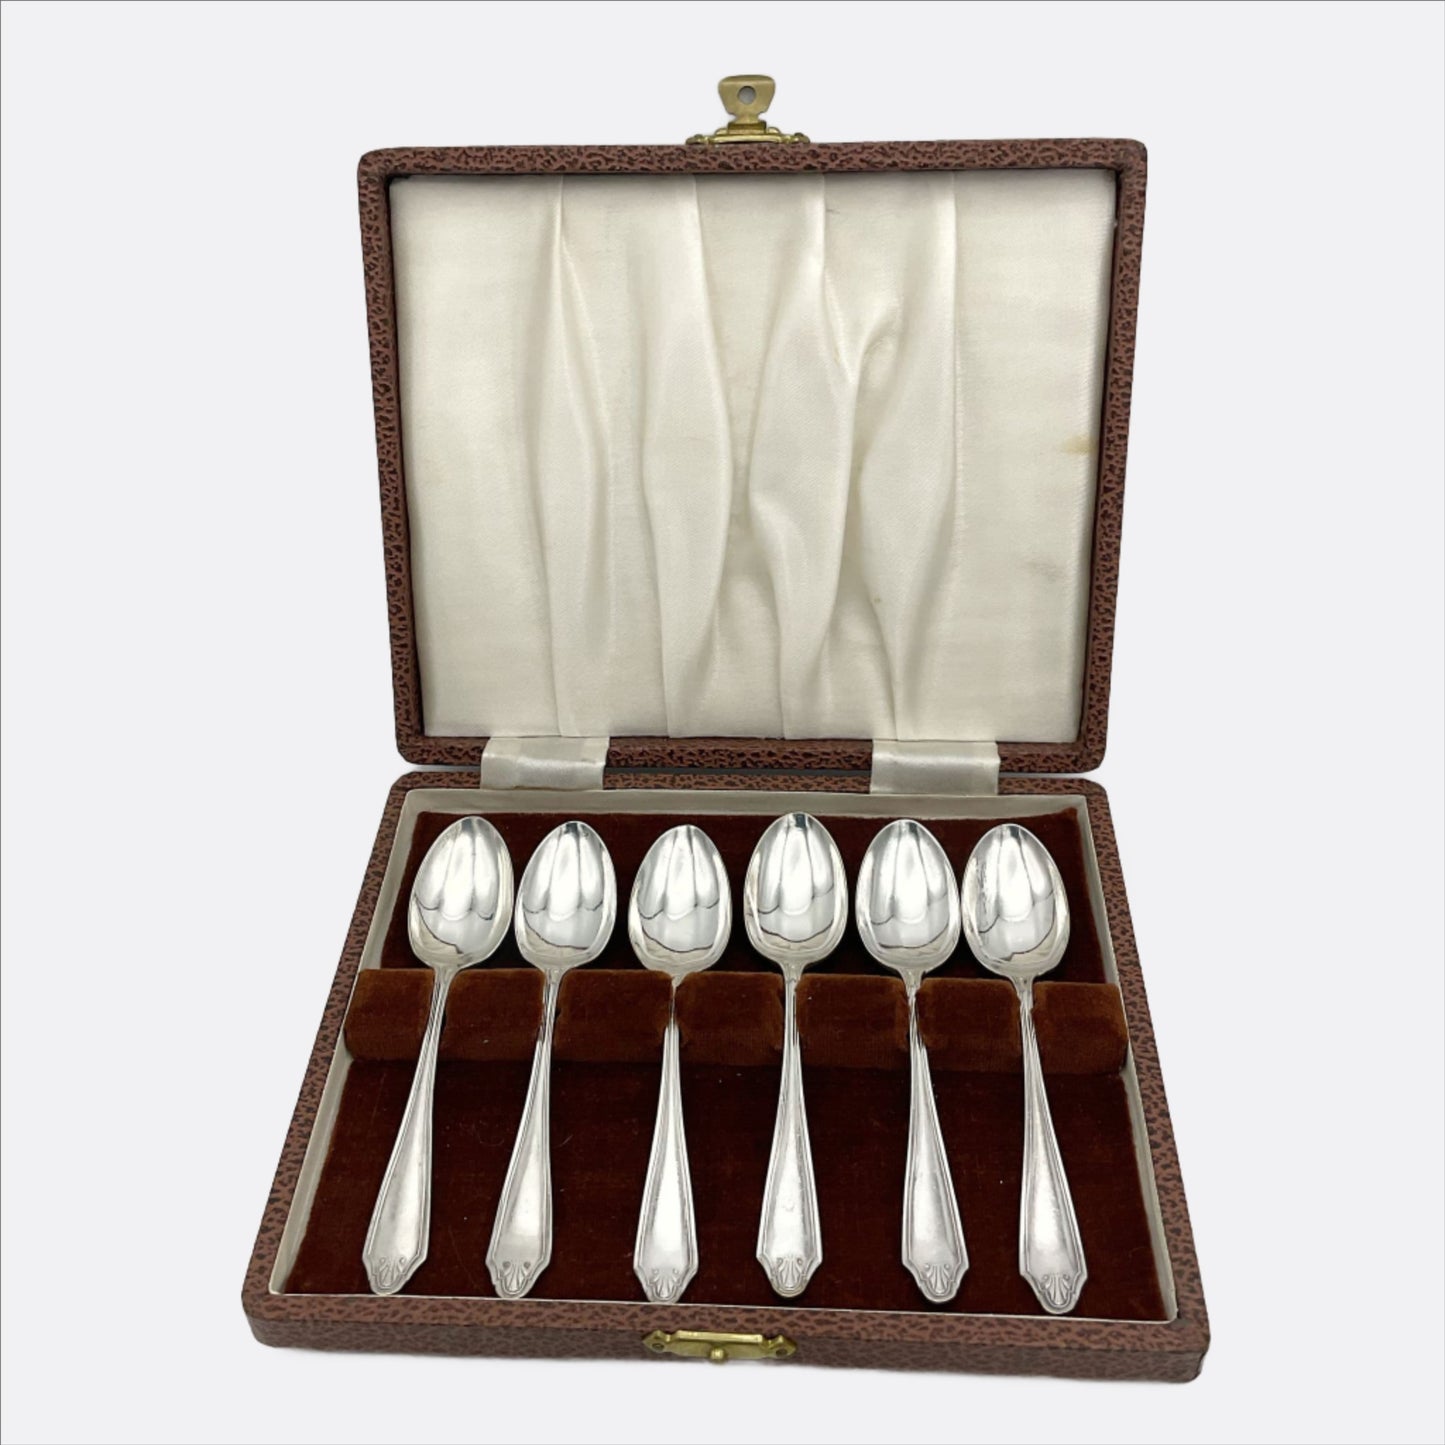 Six matching silver plated coffee spoons in a brown presentation box with a brown and cream interior.